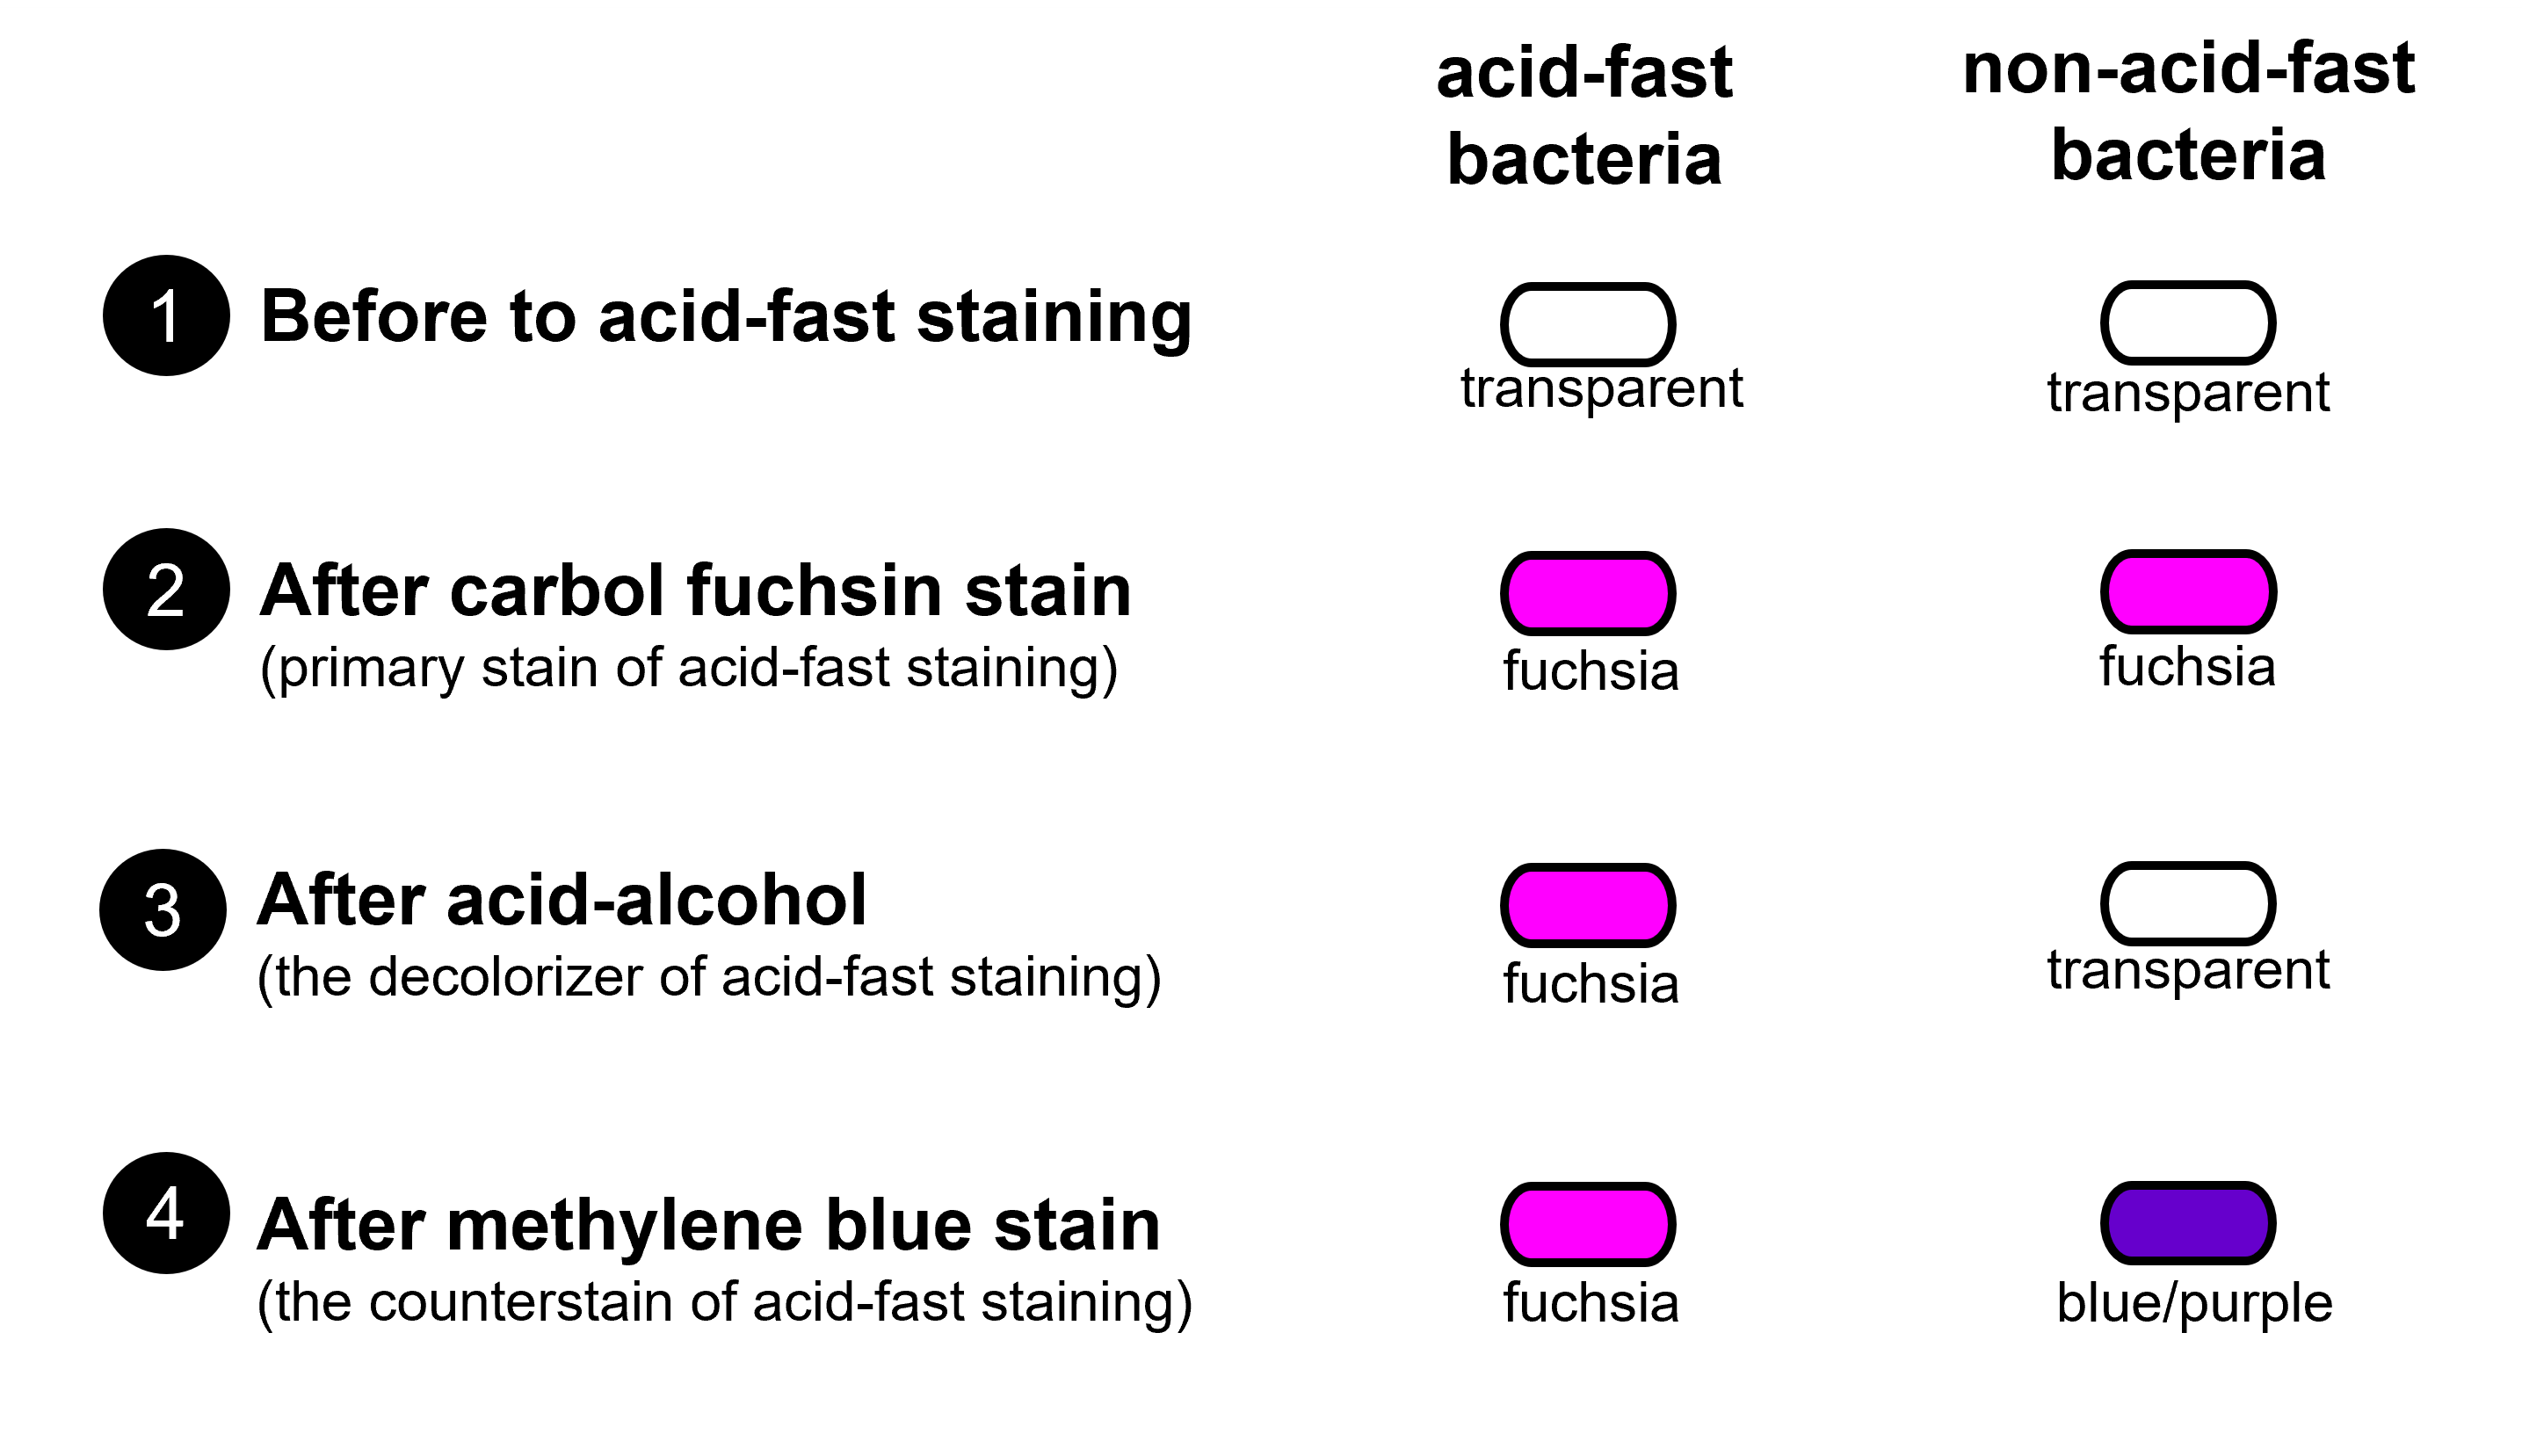 process of the acid fast stage and how the cells appear at each stage of the staining process